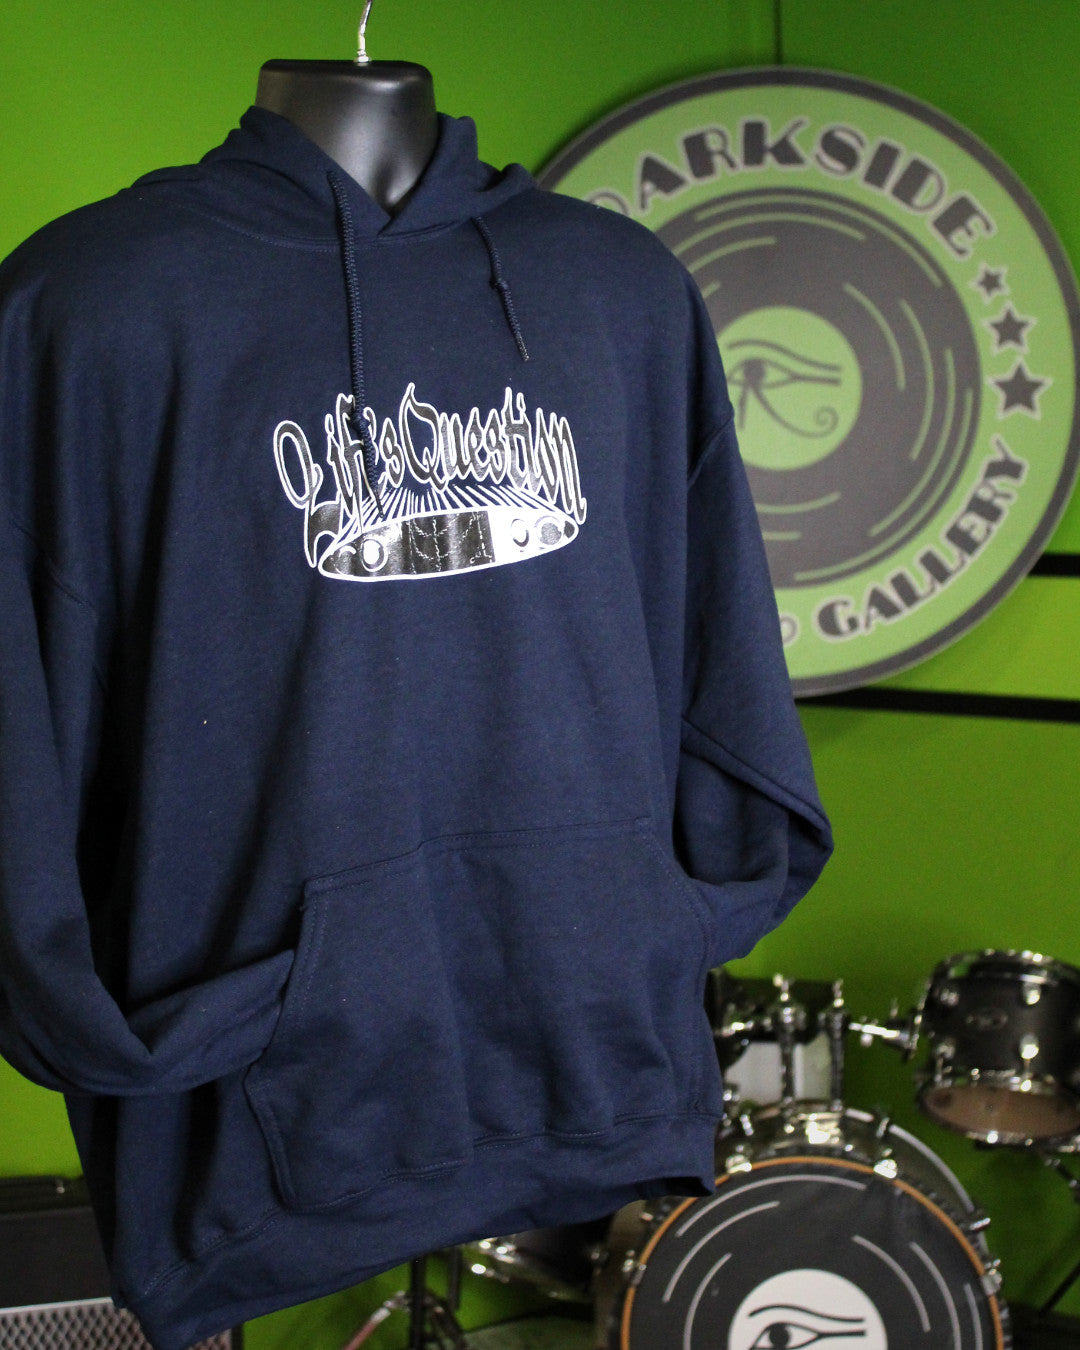 Life's Question Logo Pullover Hoodie, Navy Blue, XL - Darkside Records